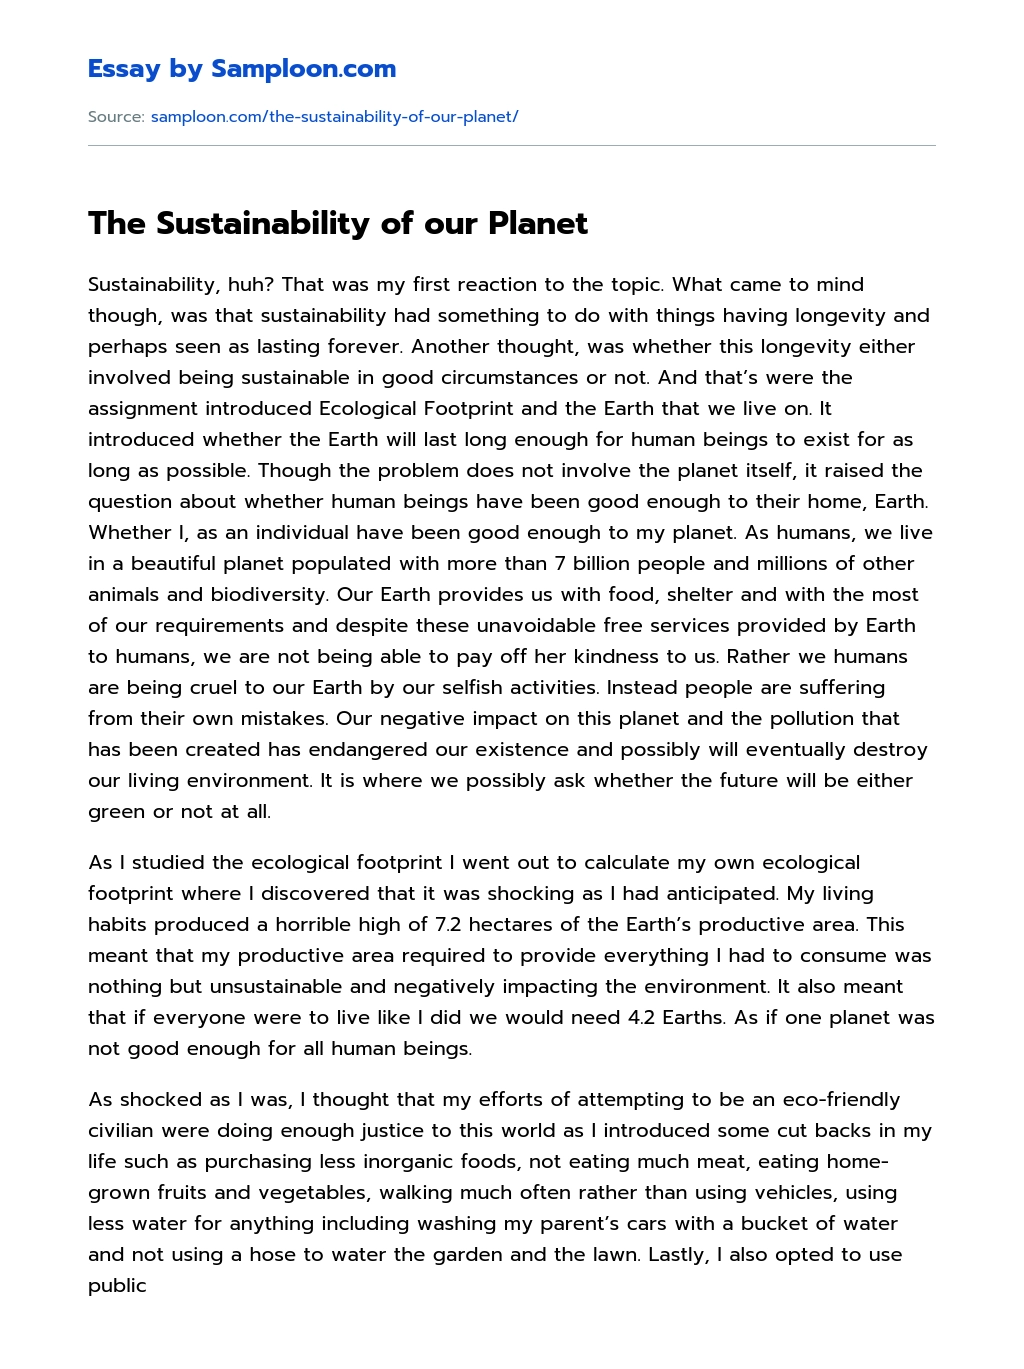 The Sustainability of our Planet essay